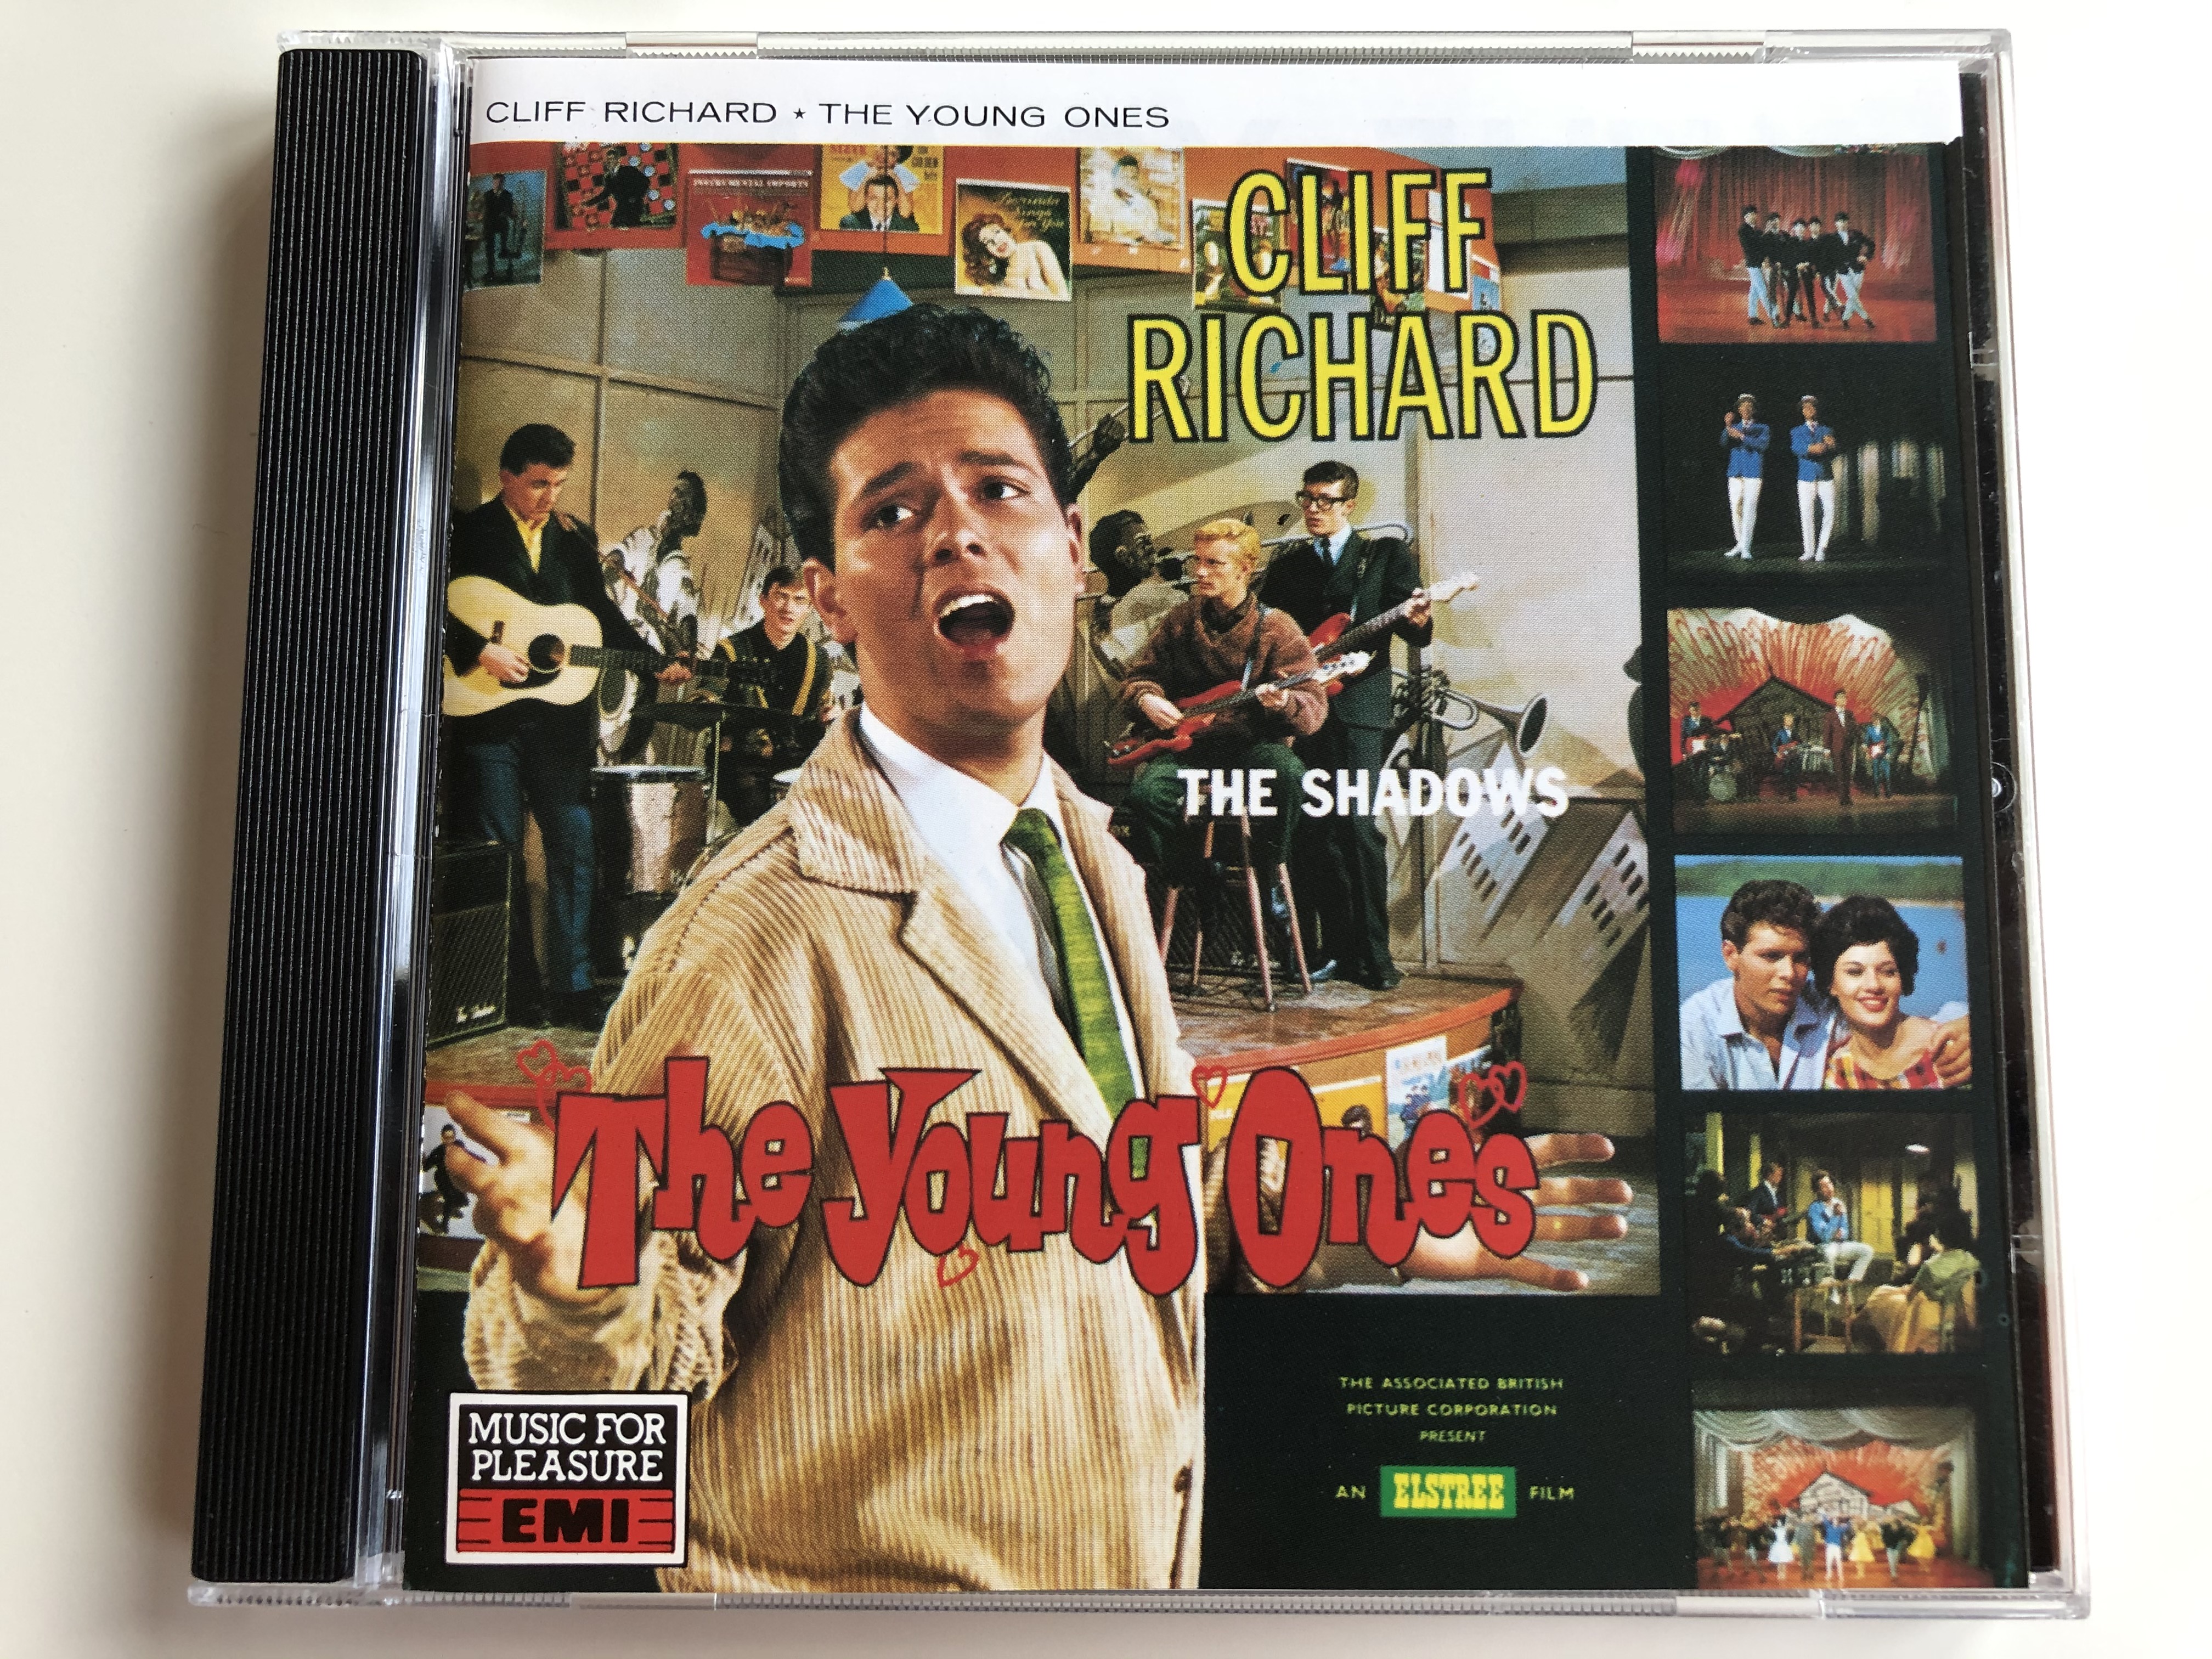 cliff-richard-the-young-ones-cliff-richard-the-shadows-music-for-pleasure-audio-cd-stereo-cd-mfp-6020-1-.jpg